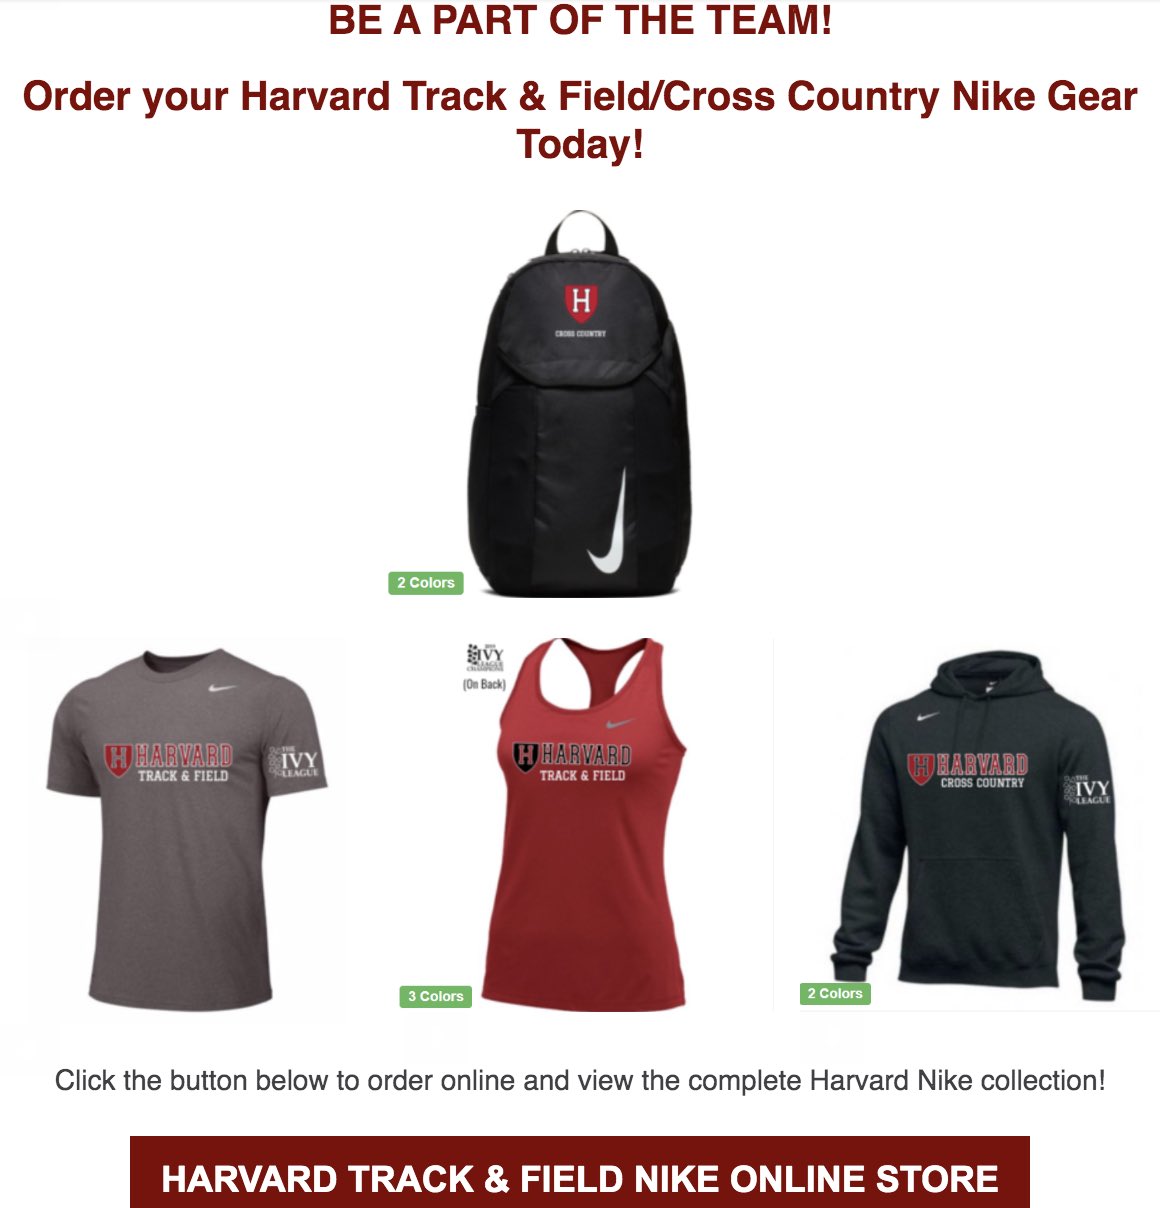 terciopelo Aleta Repegar Harvard T&F | XC on Twitter: "The Nike Team Store for Harvard T&amp;F/XC is  now live! Get your official gear and show your Crimson pride. Link to the  team store is in